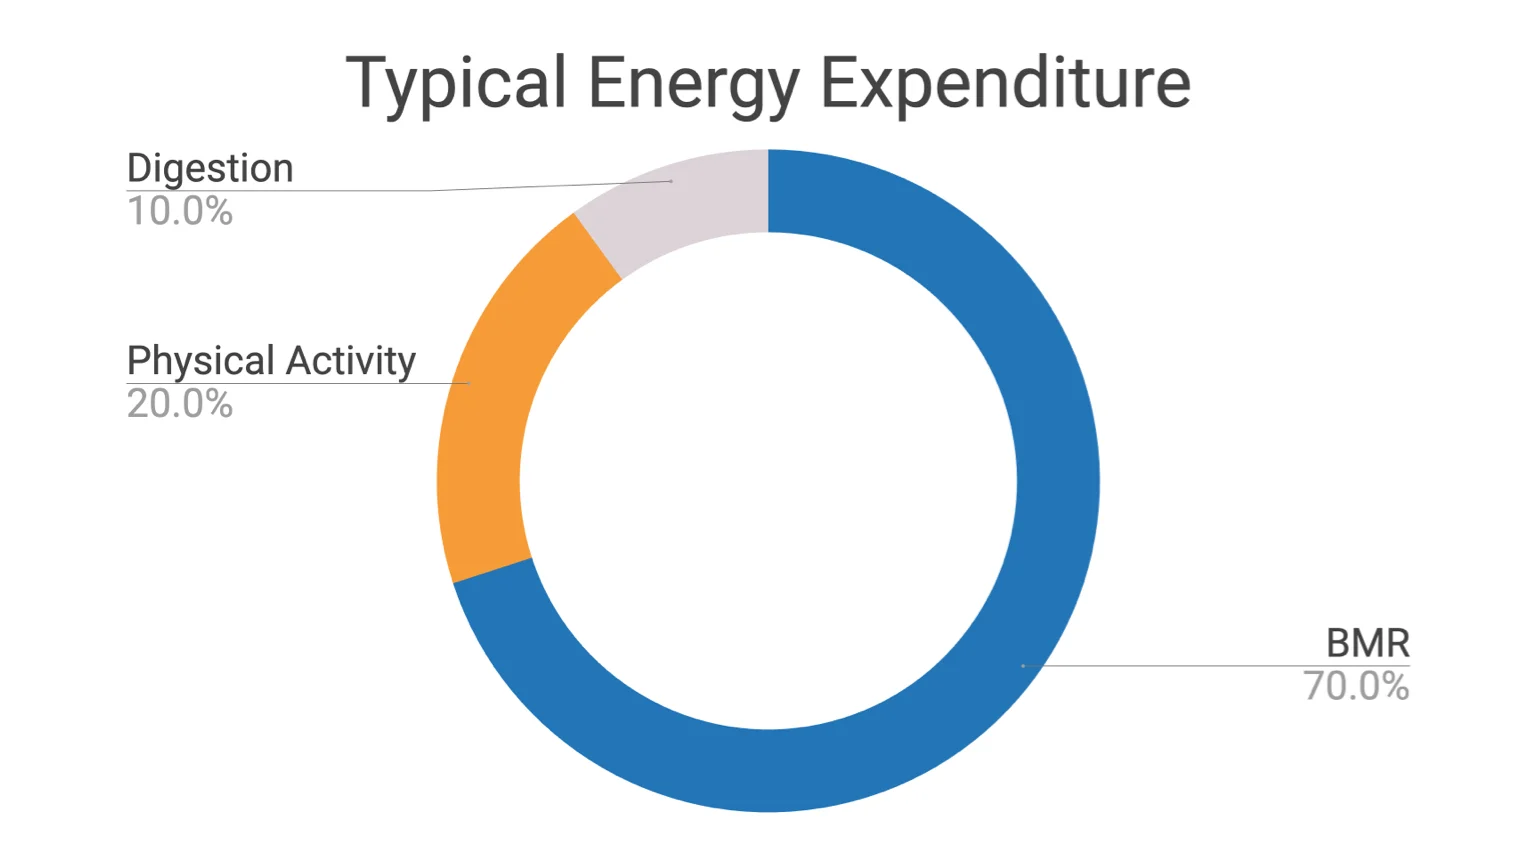 BMR makes up about 70% of a person's total energy expenditure. The BMR calculator uses a Standard Activity Factor to estimate a person's TDEE.